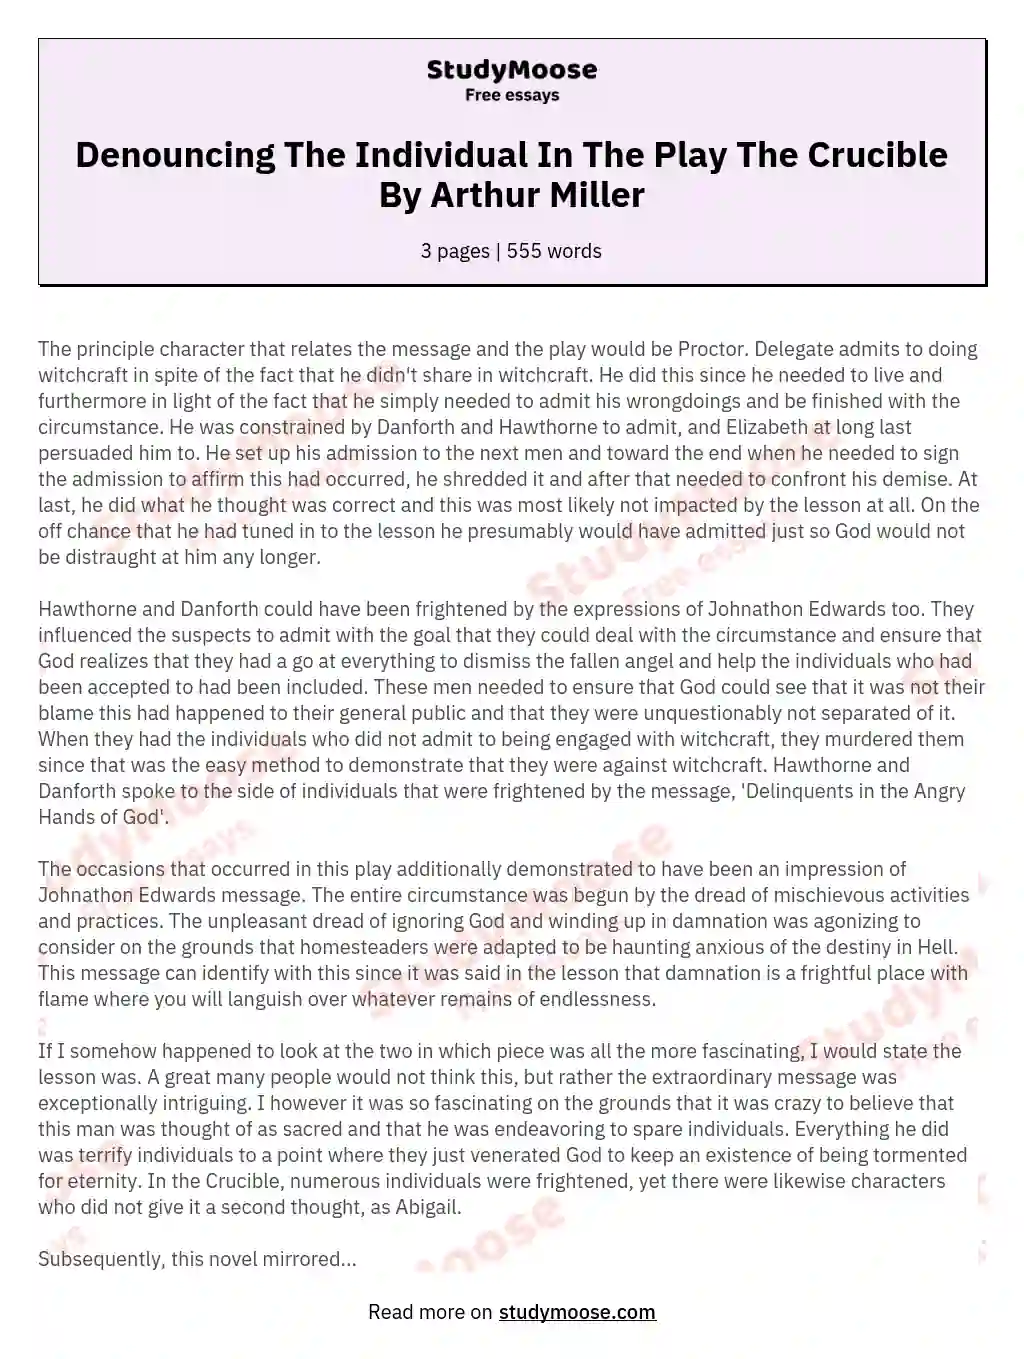 Denouncing The Individual In The Play The Crucible By Arthur Miller essay